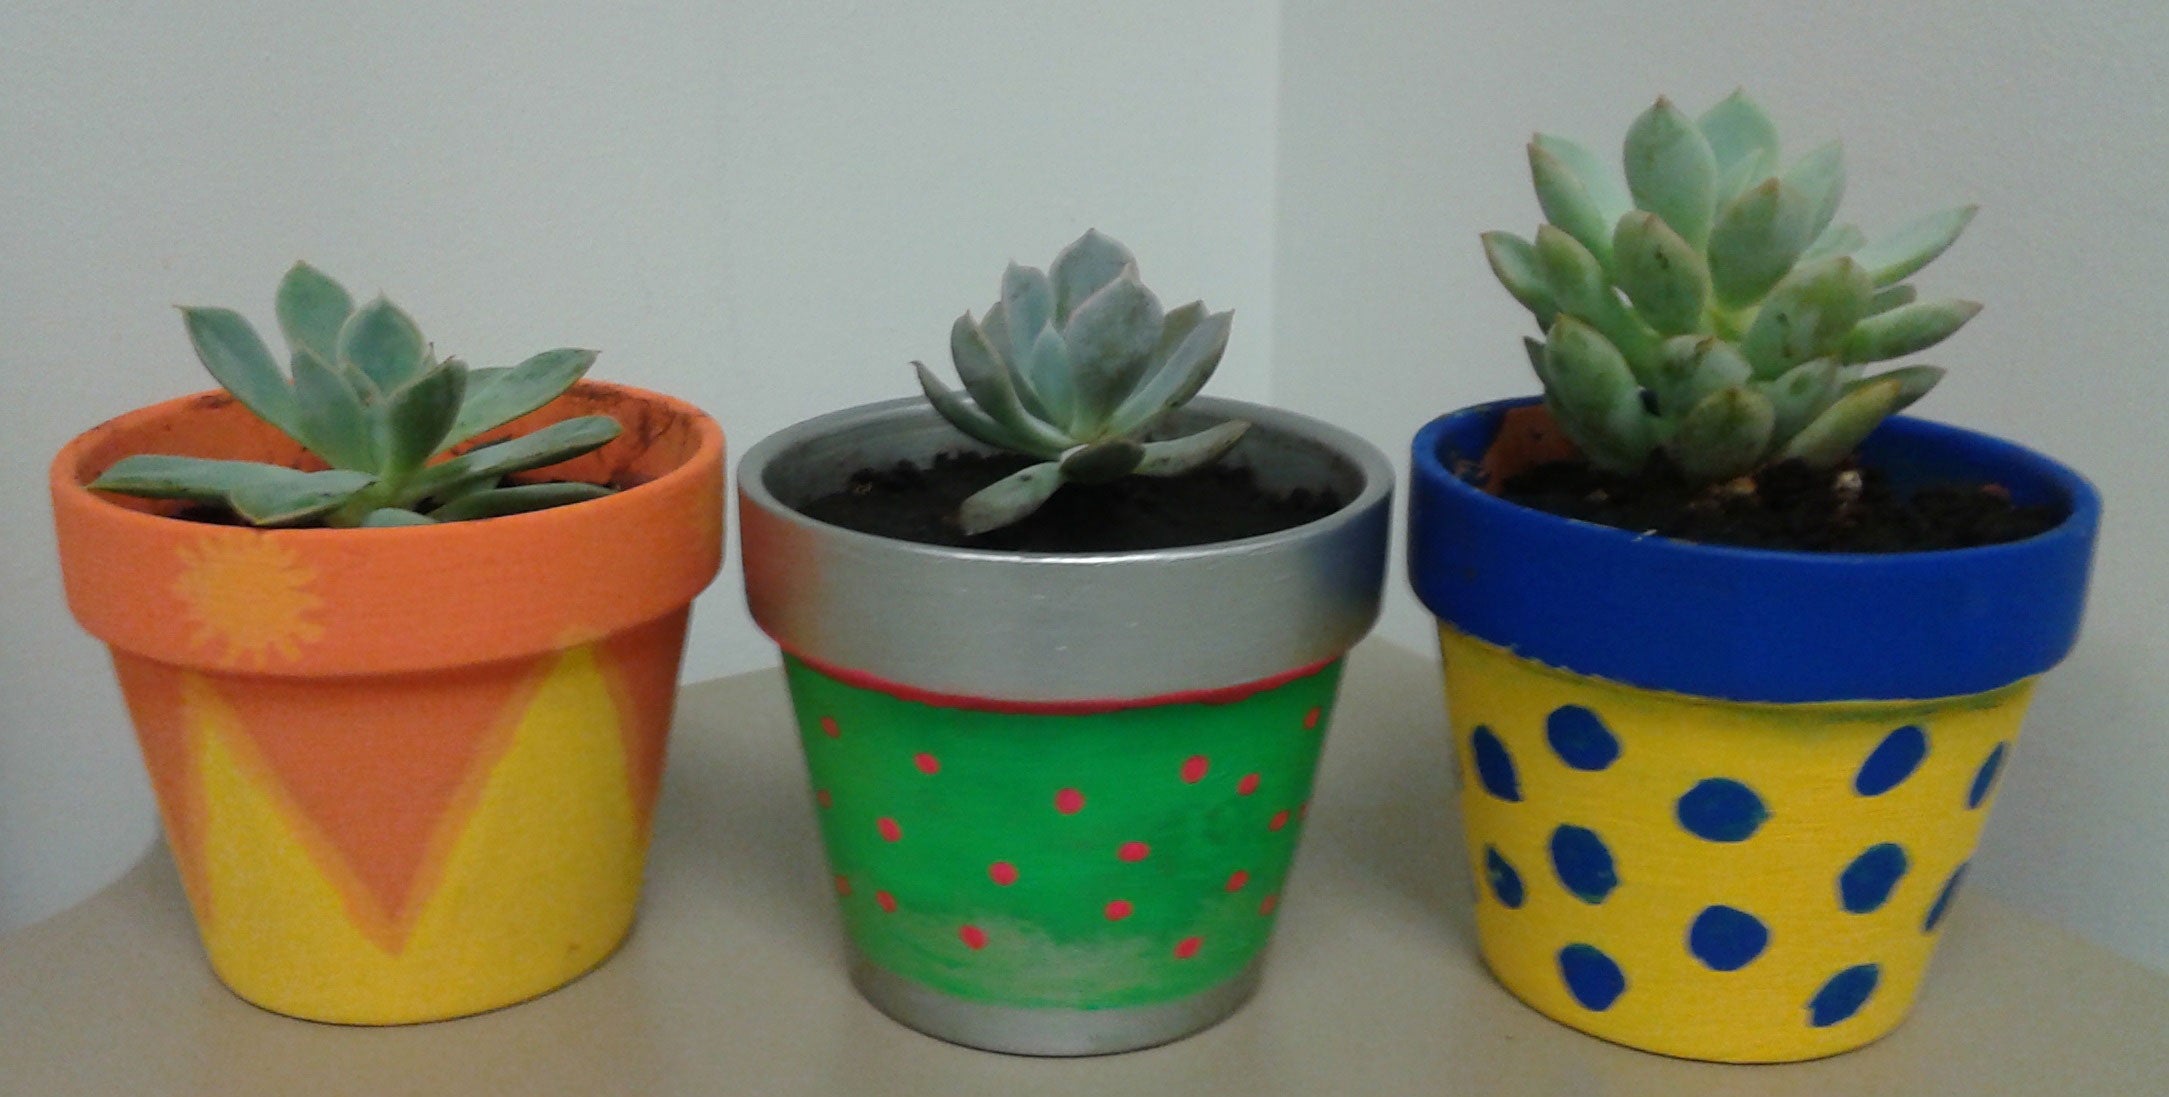 The three potted succulents produced by our group members